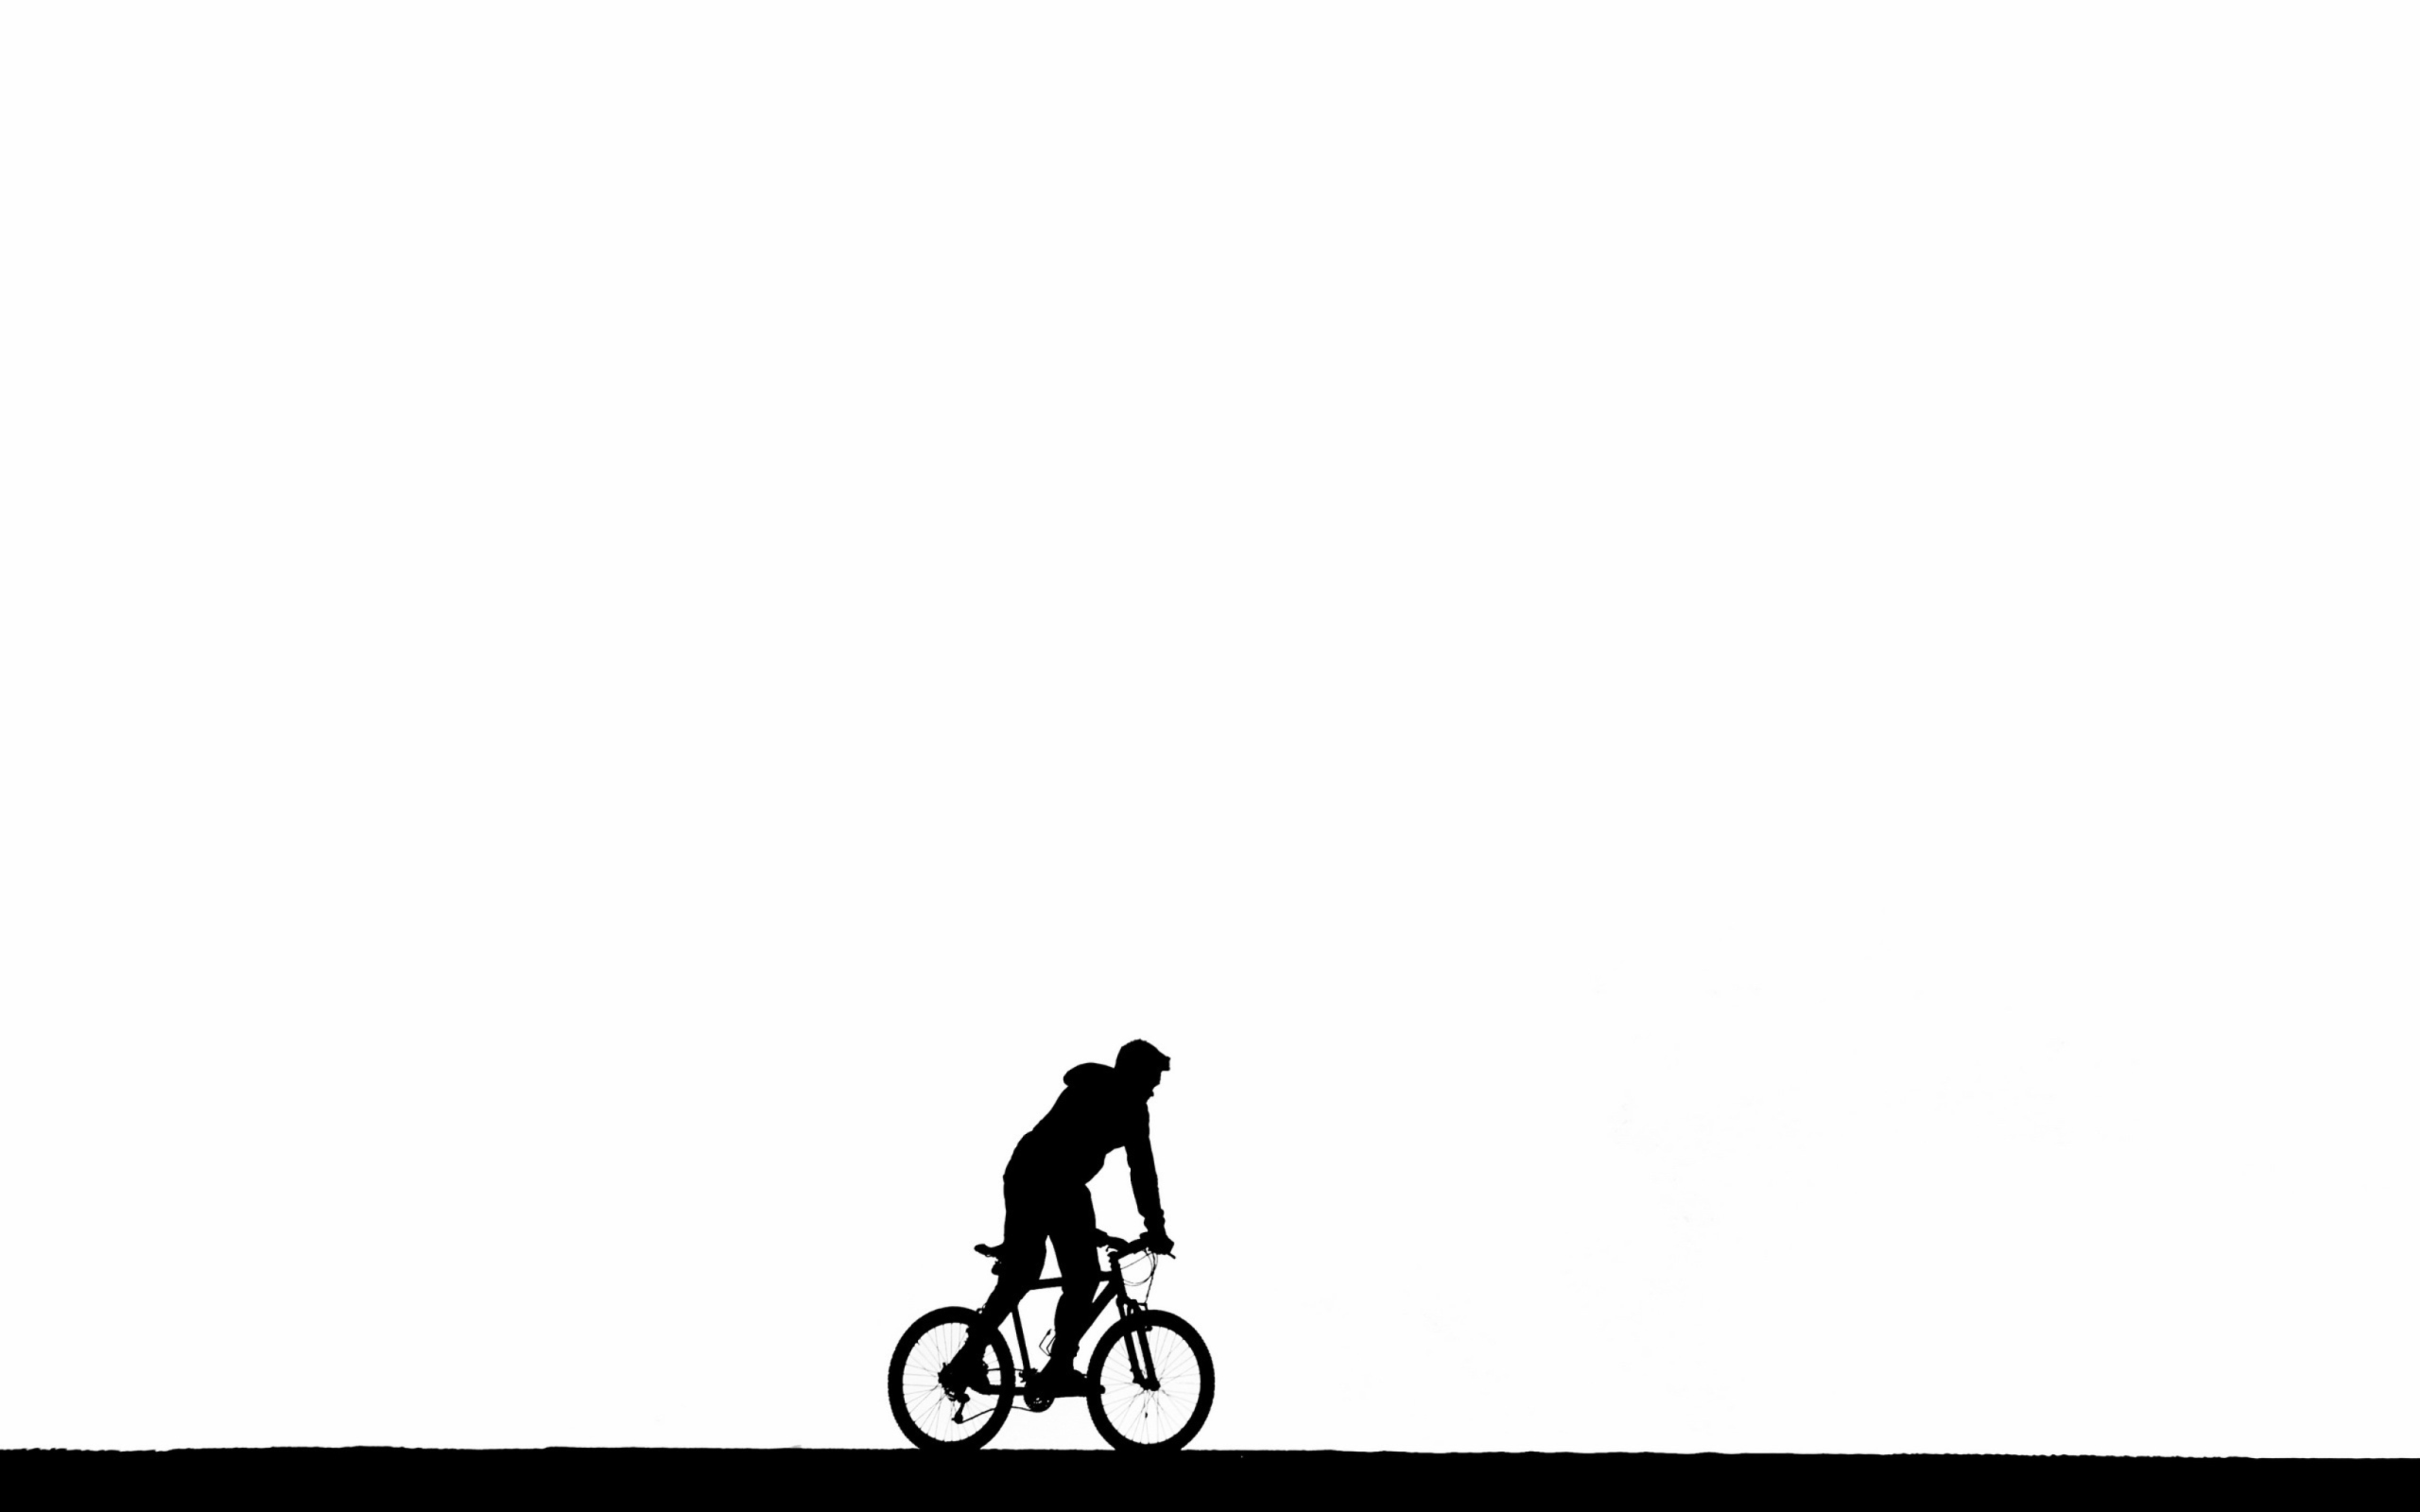 Bicycle Silhouette wallpaper 2560x1600